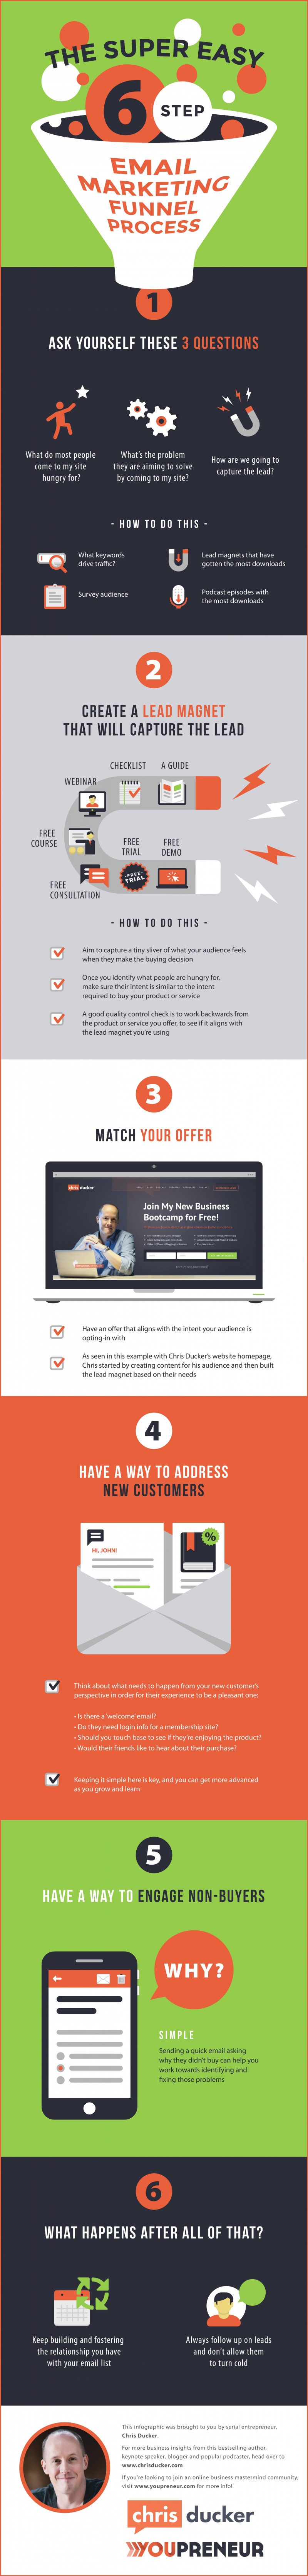 The Super Easy 6-Step Email Marketing Funnel [Infographic]